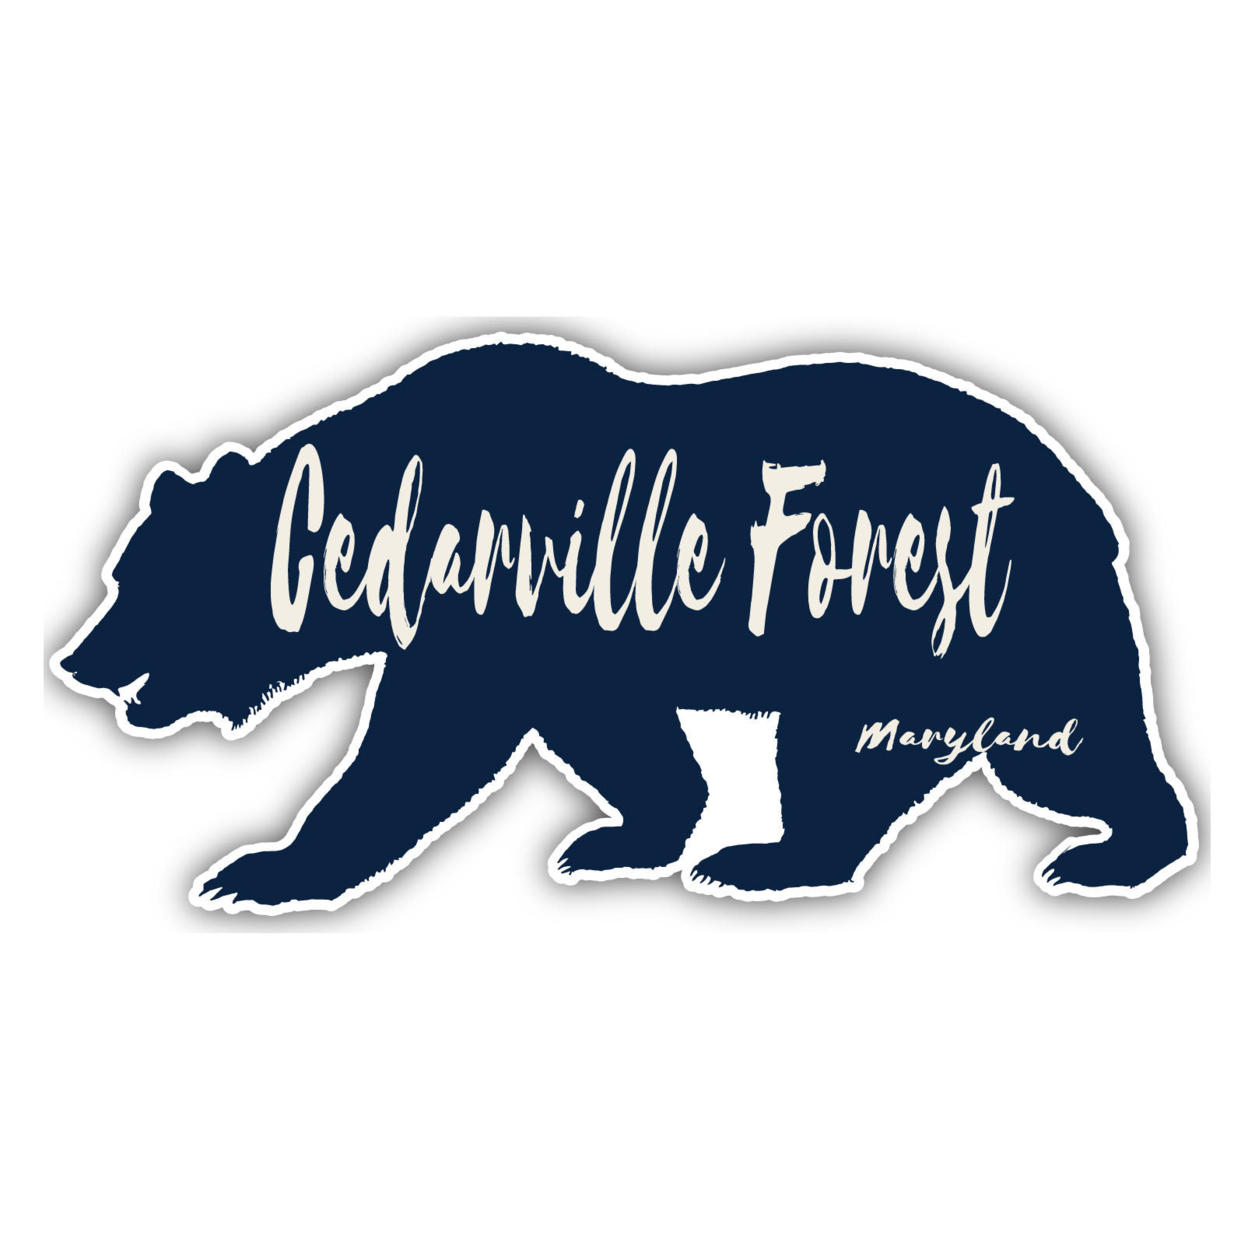 Cedarville Forest Maryland Souvenir Decorative Stickers (Choose Theme And Size) - Single Unit, 6-Inch, Bear